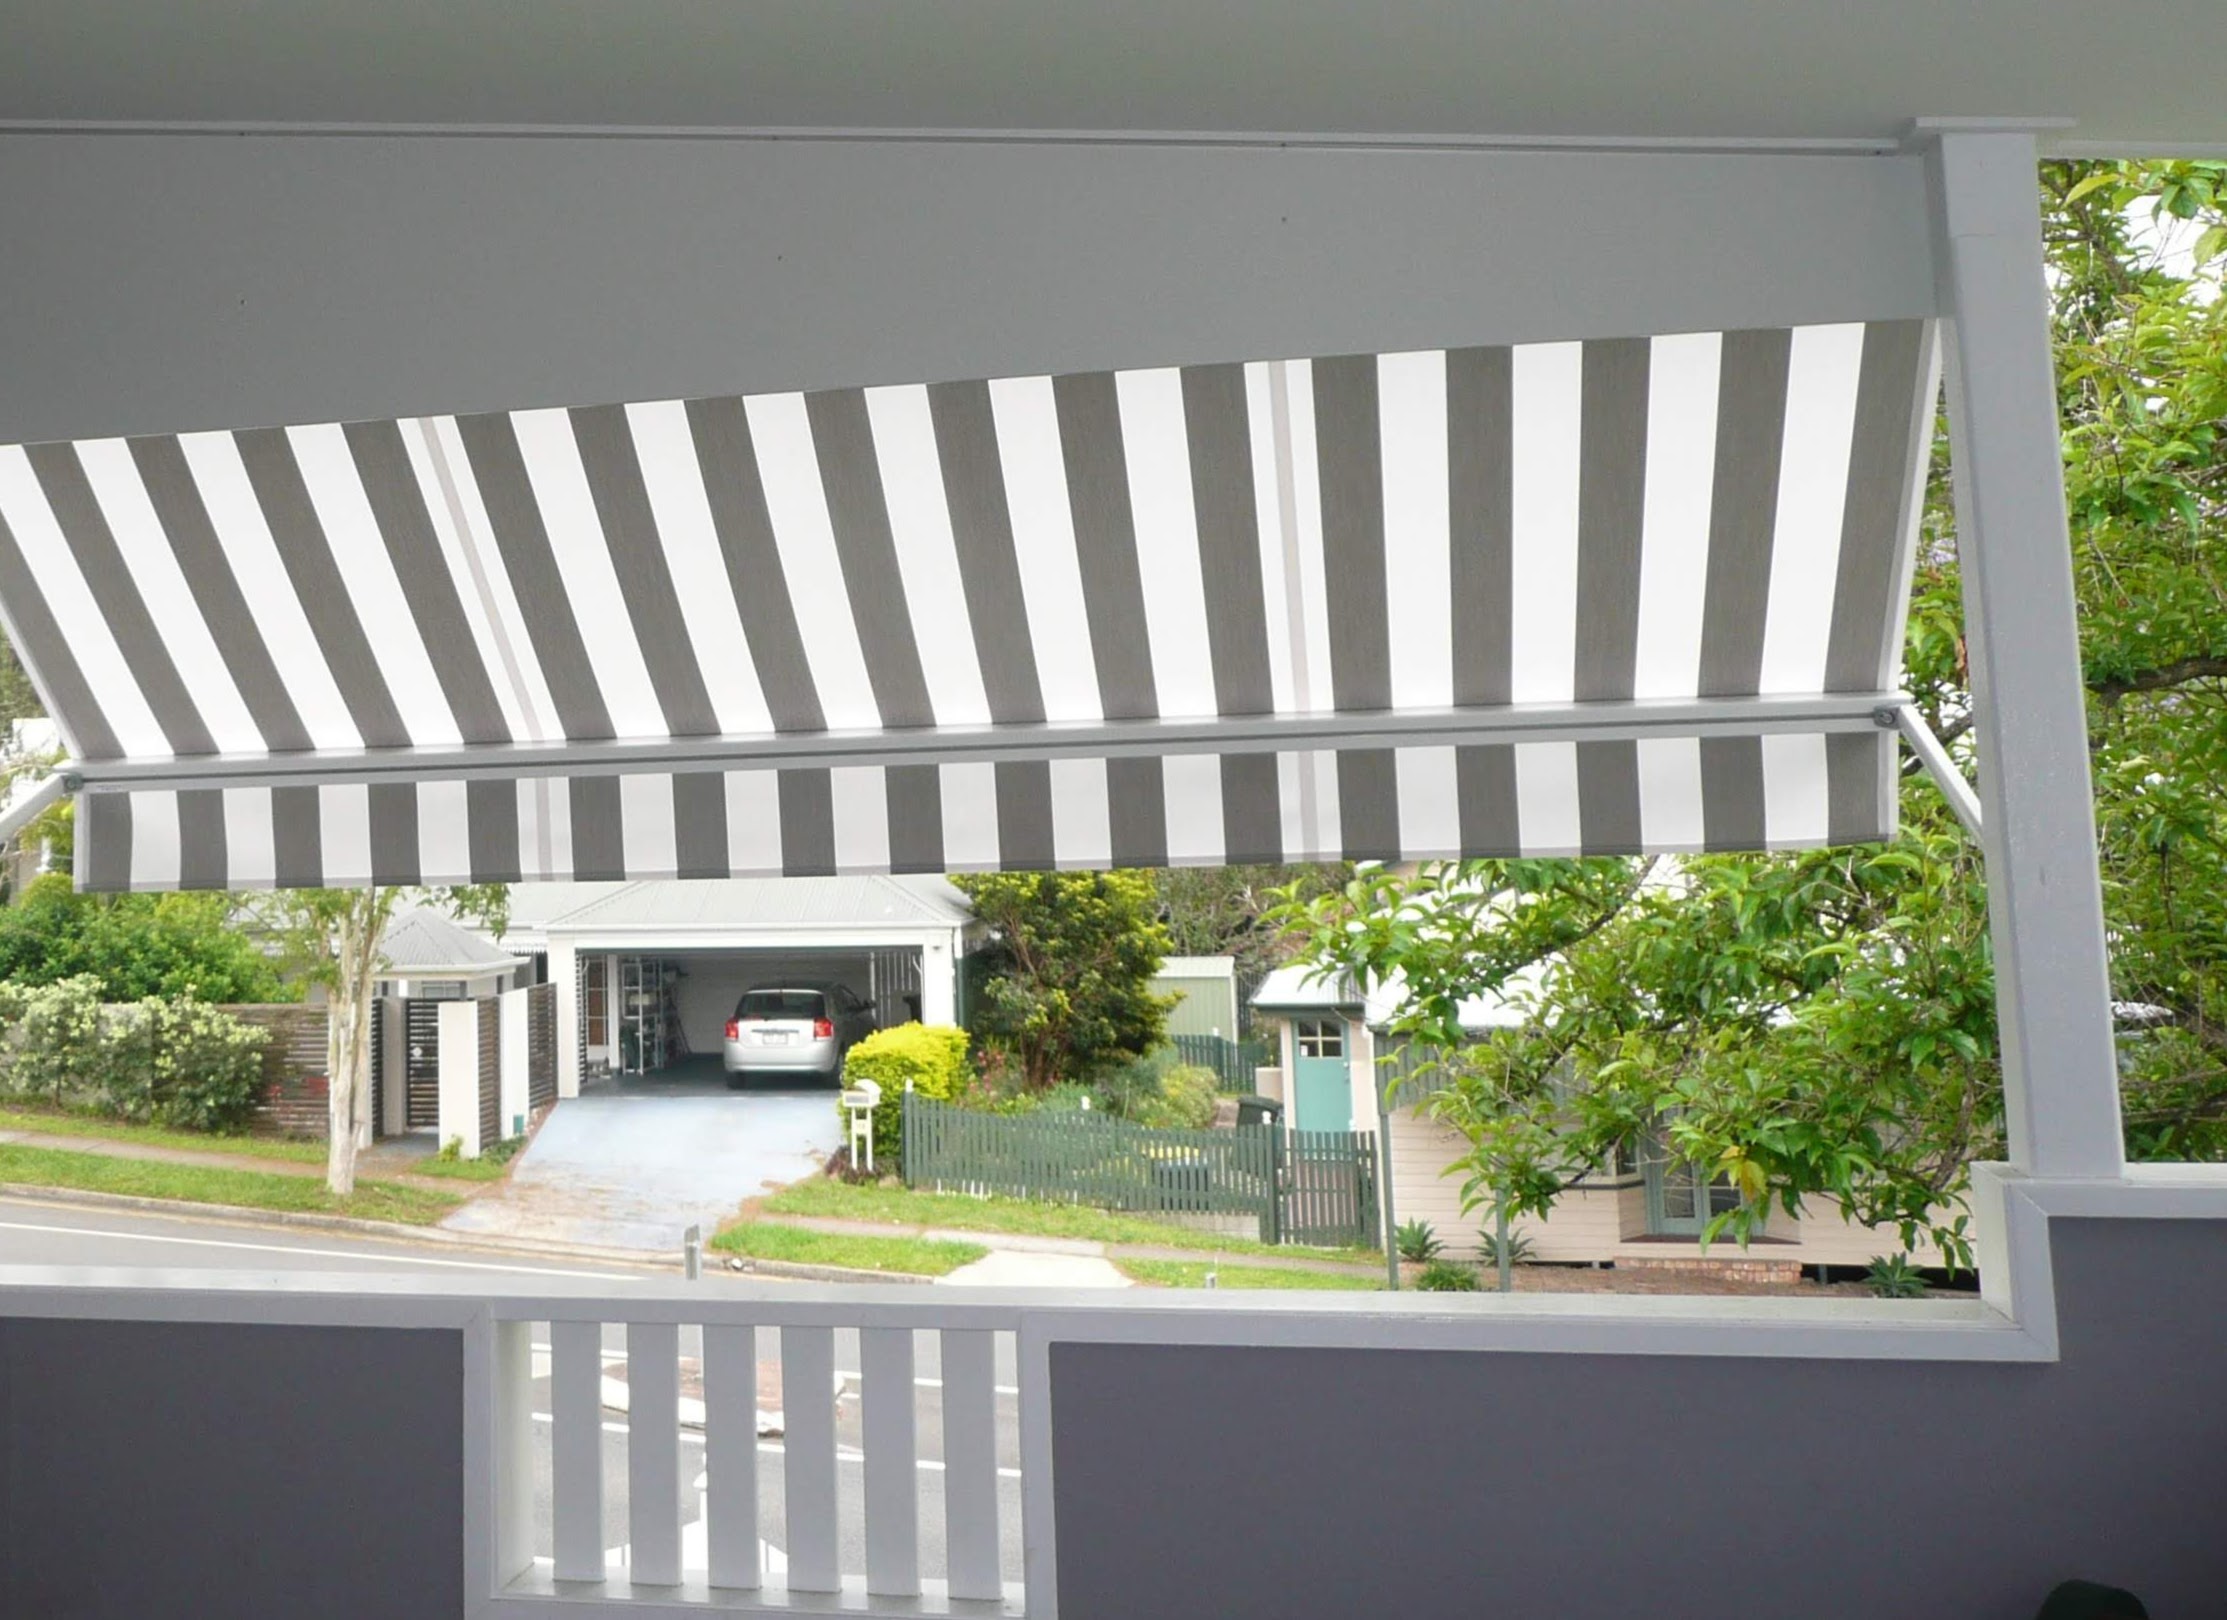 If you’re renovating a home and after a stylish guide to awnings, this post shares the popular styles to consider.